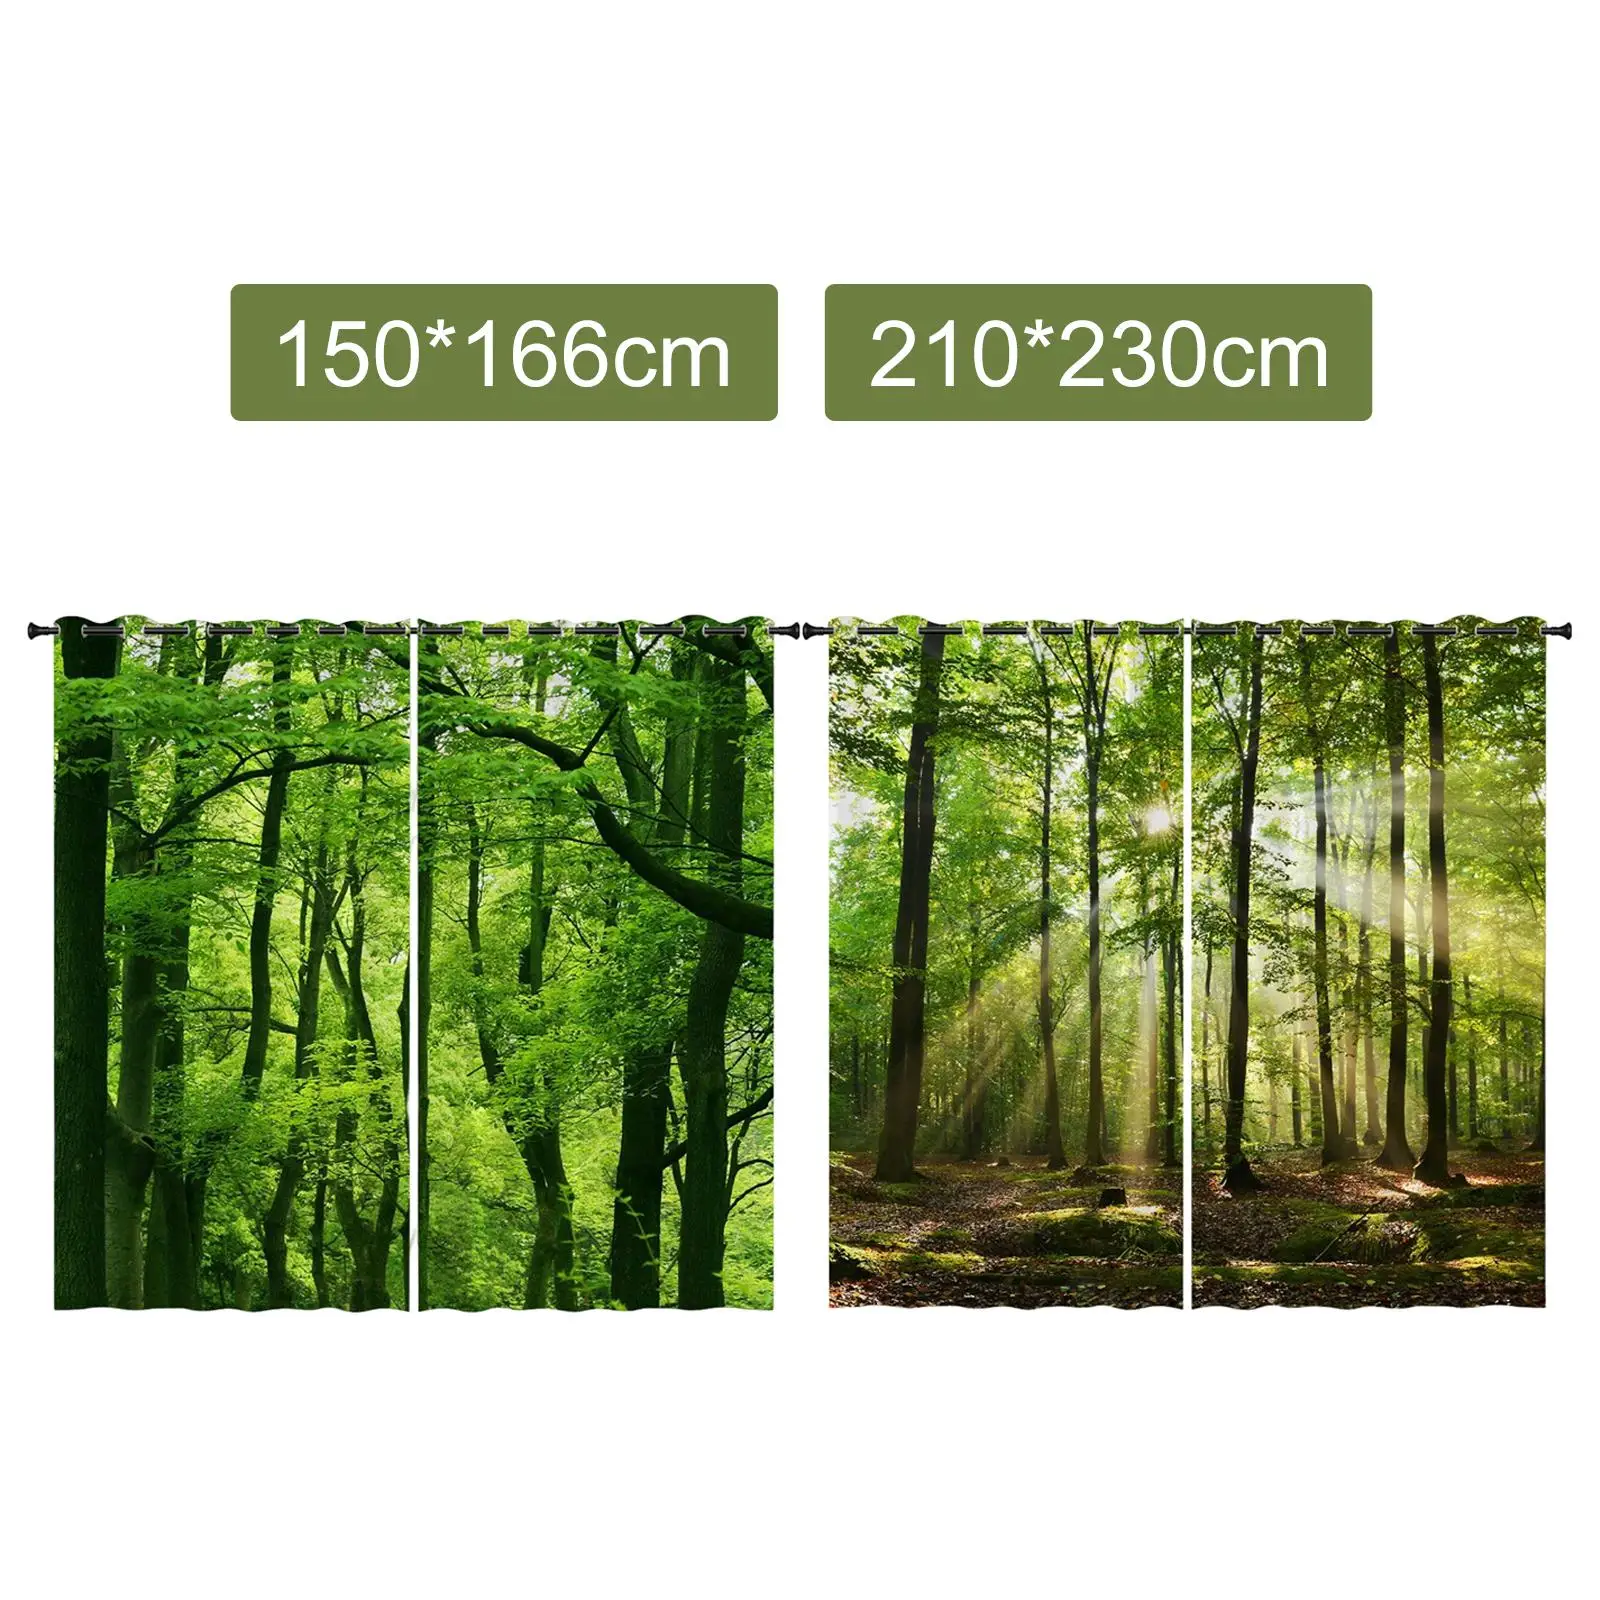 Forest Tree Landscape Window Curtains Thermal Insulated Darkening Draperies